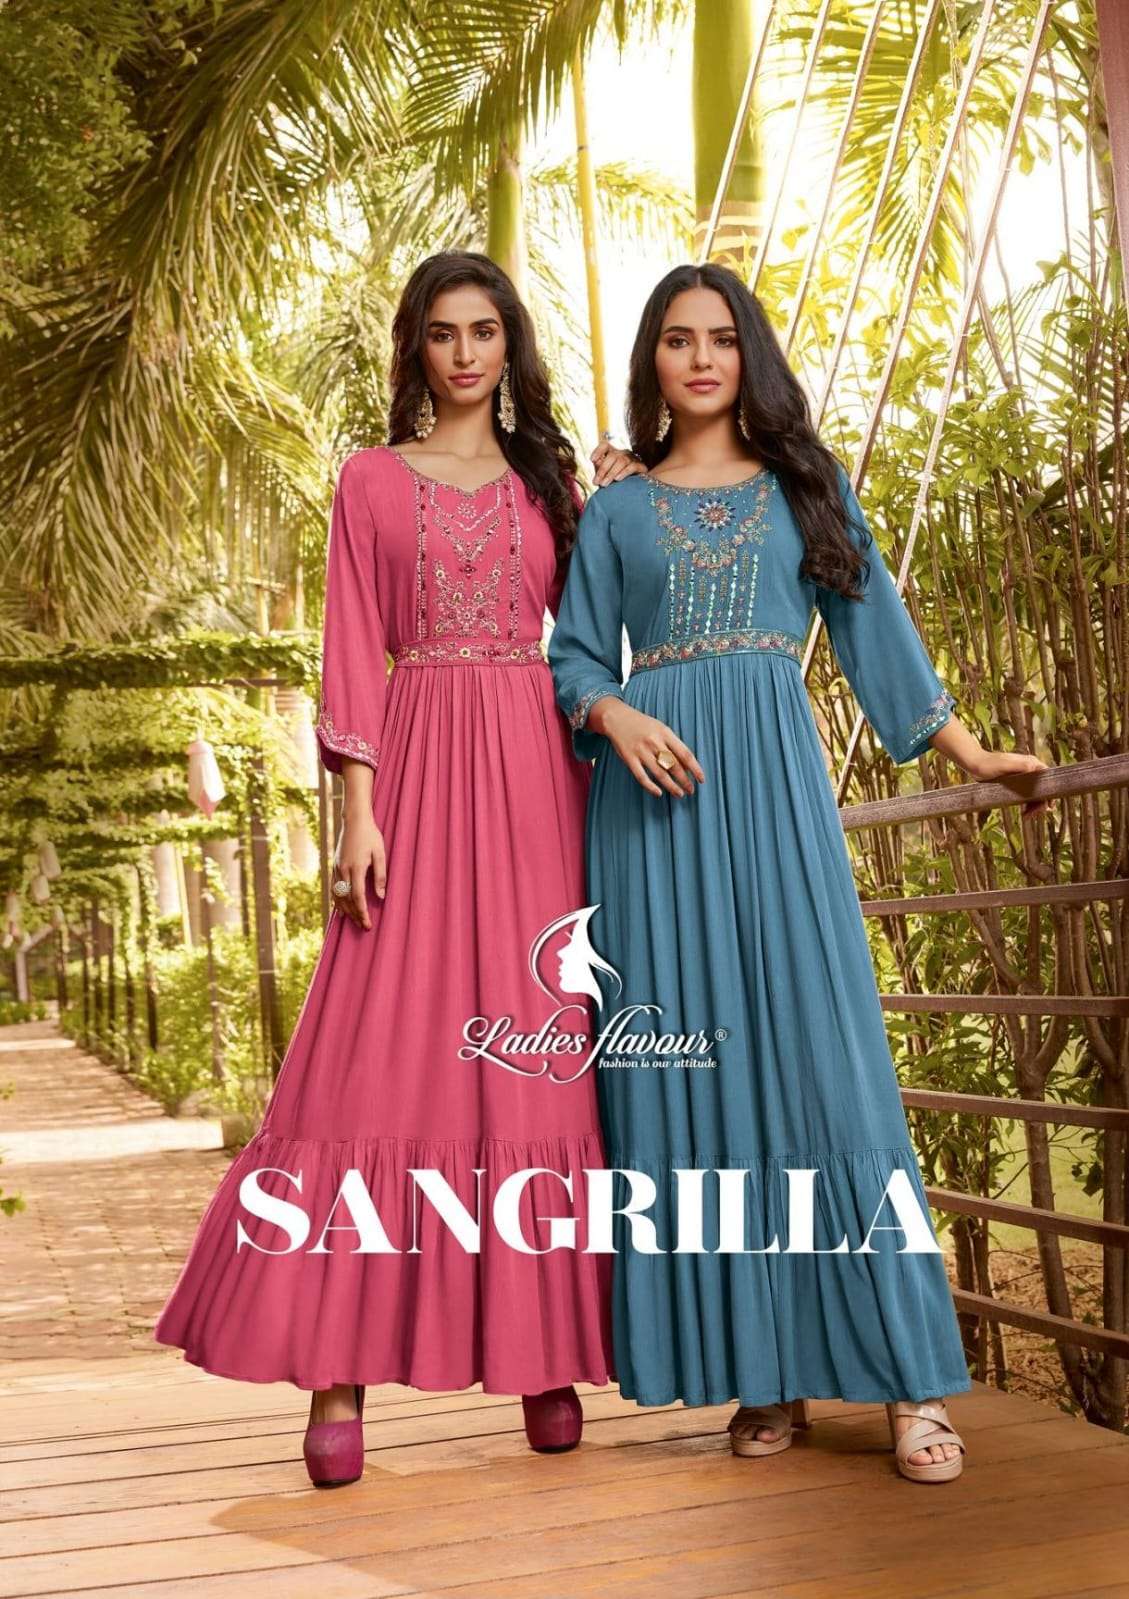 SANGRILLA HEVAY RAYON RINKLE EMBROIDERY AND HANDWORK LONG KURTI WITH BELT BY LADIES FLAVOUR BRAND WH...